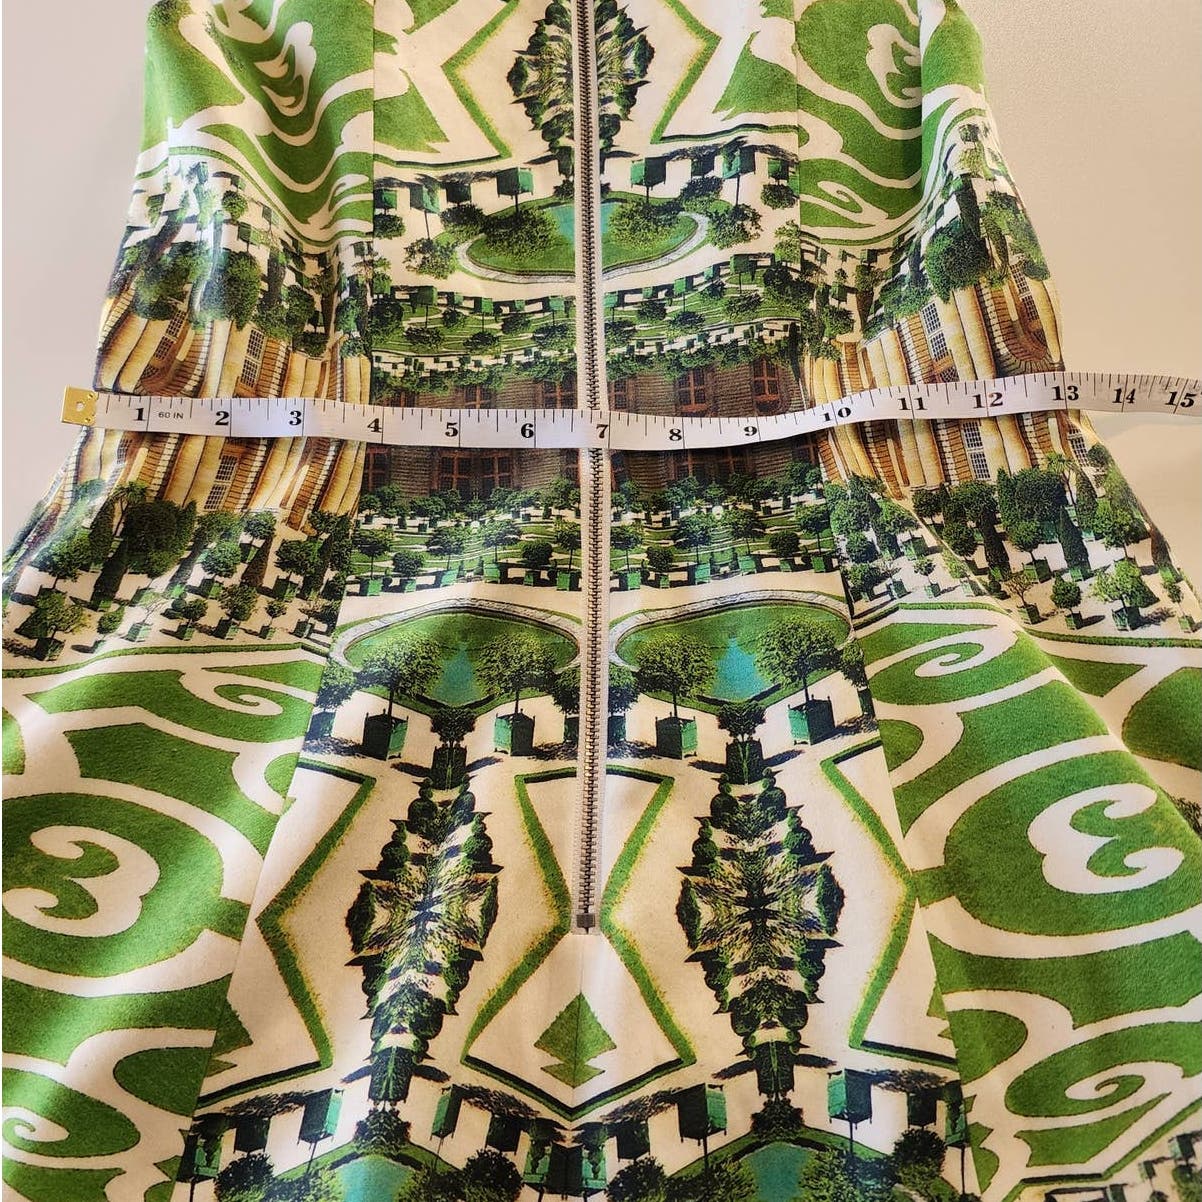 Alice + Olivia Carrie Versailles Dress Green Sleeveless Patterned Size 4